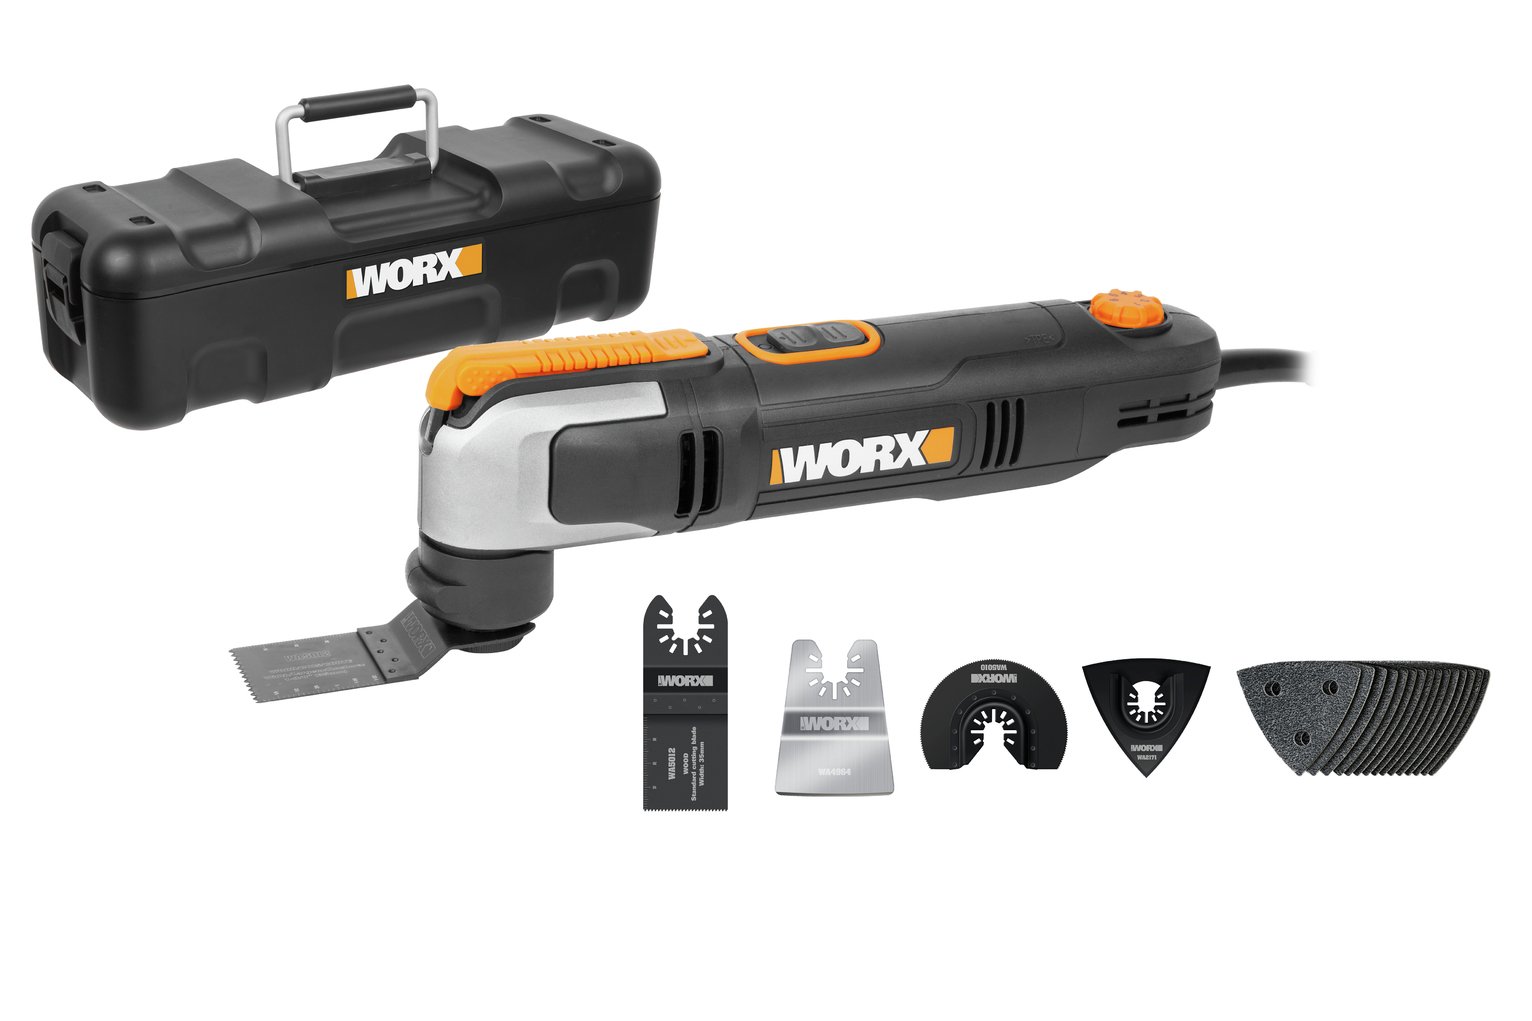 WORX WX686 Sonicrafter & Accessories Review